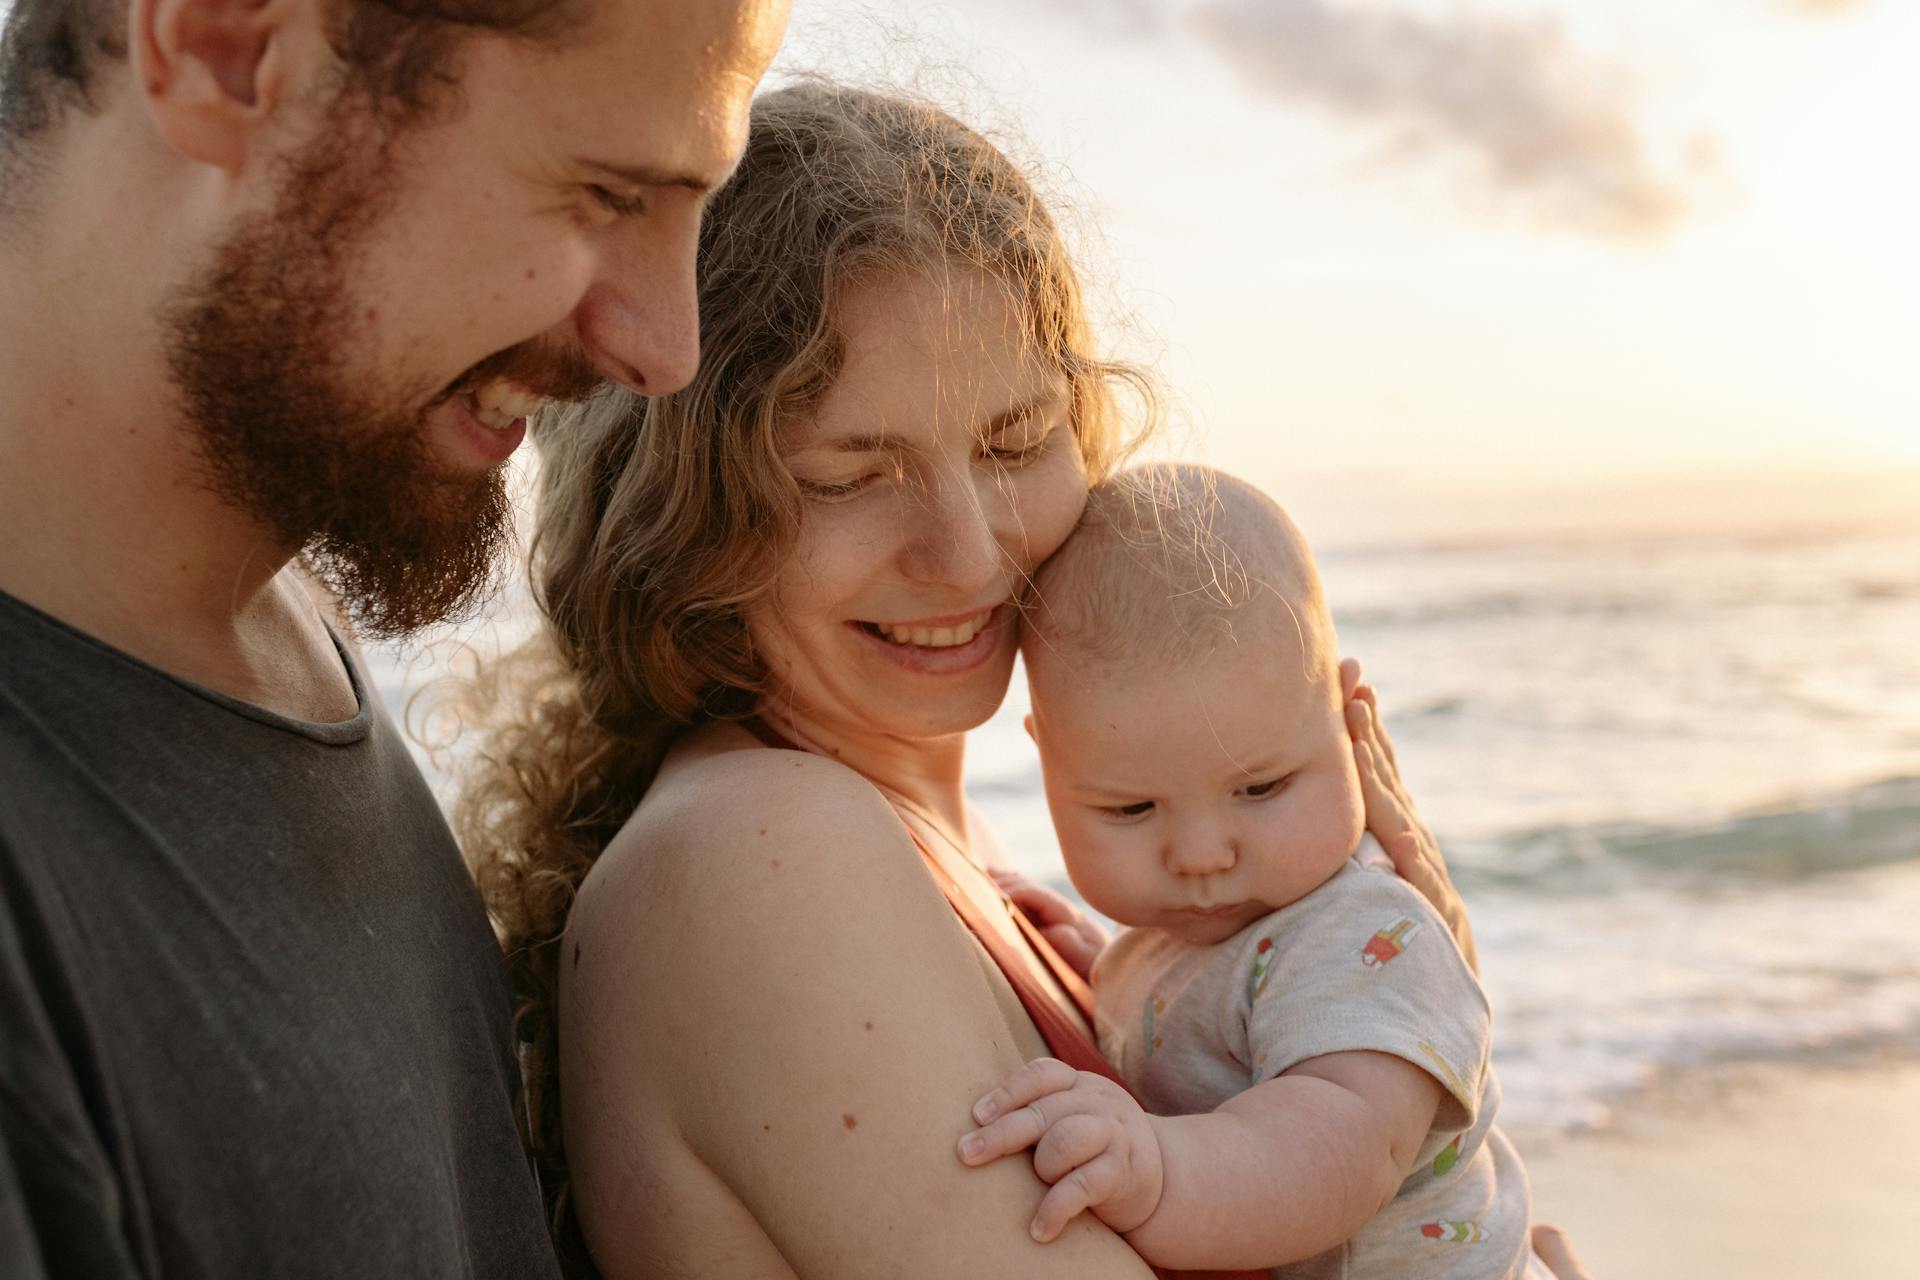 Happy parents holding a baby | Source: Pexels